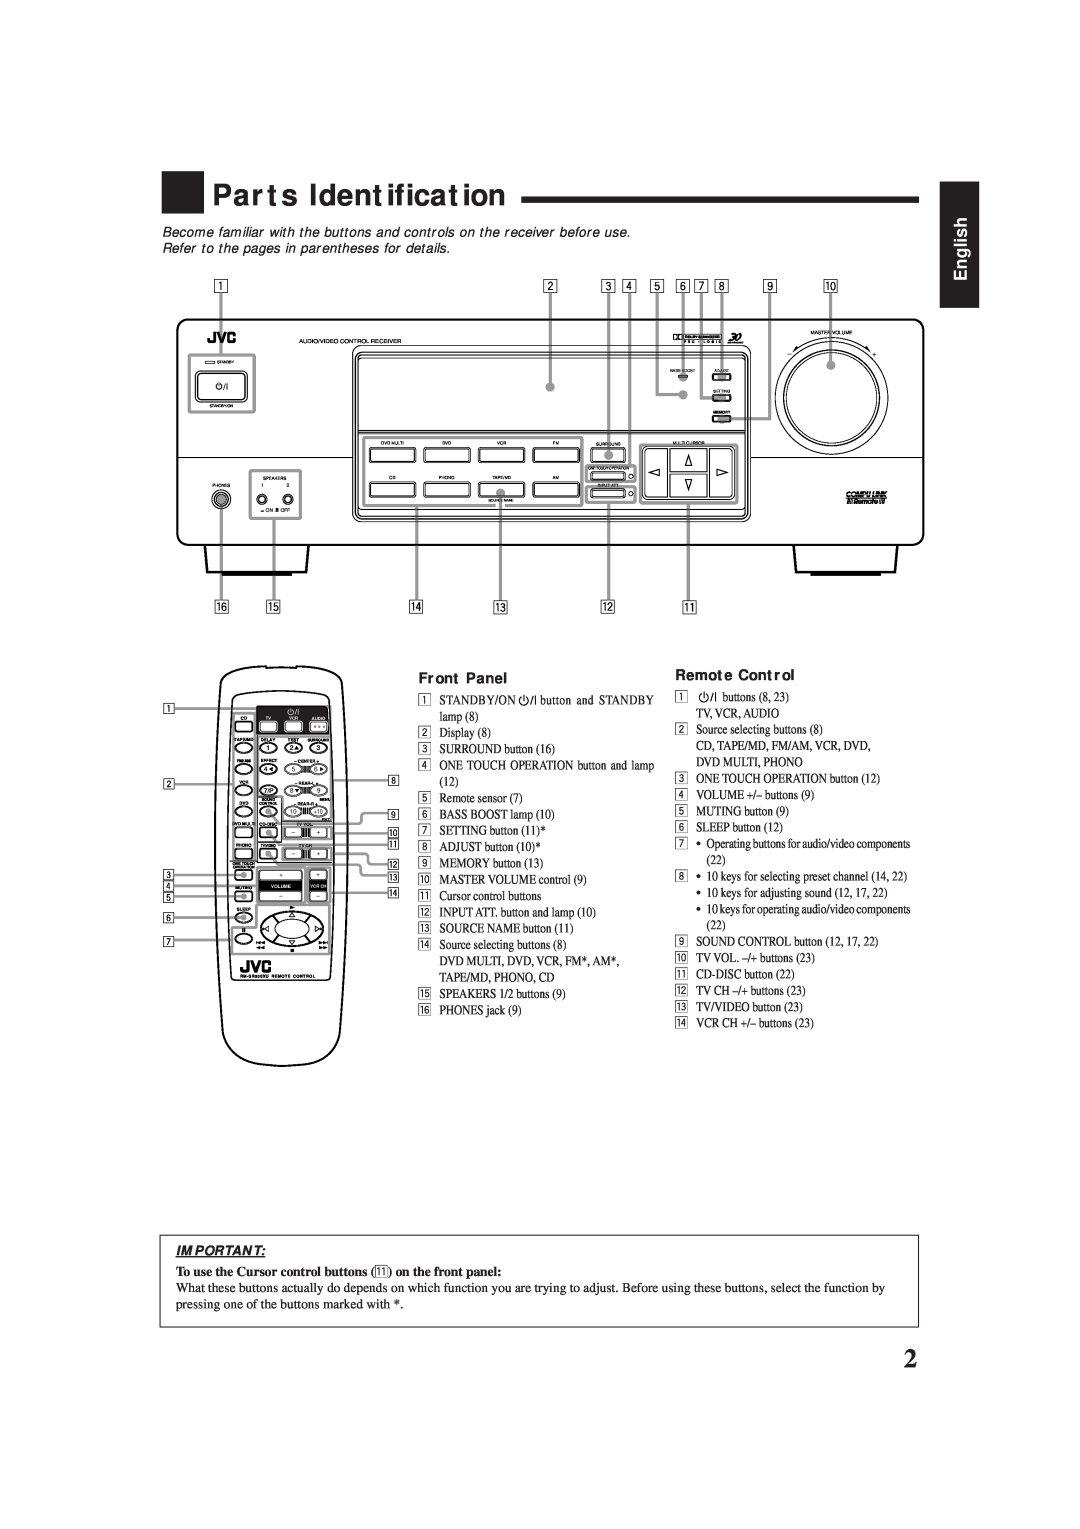 JVC RX-5001VGD manual Parts Identification, English, Front Panel, Remote Control 